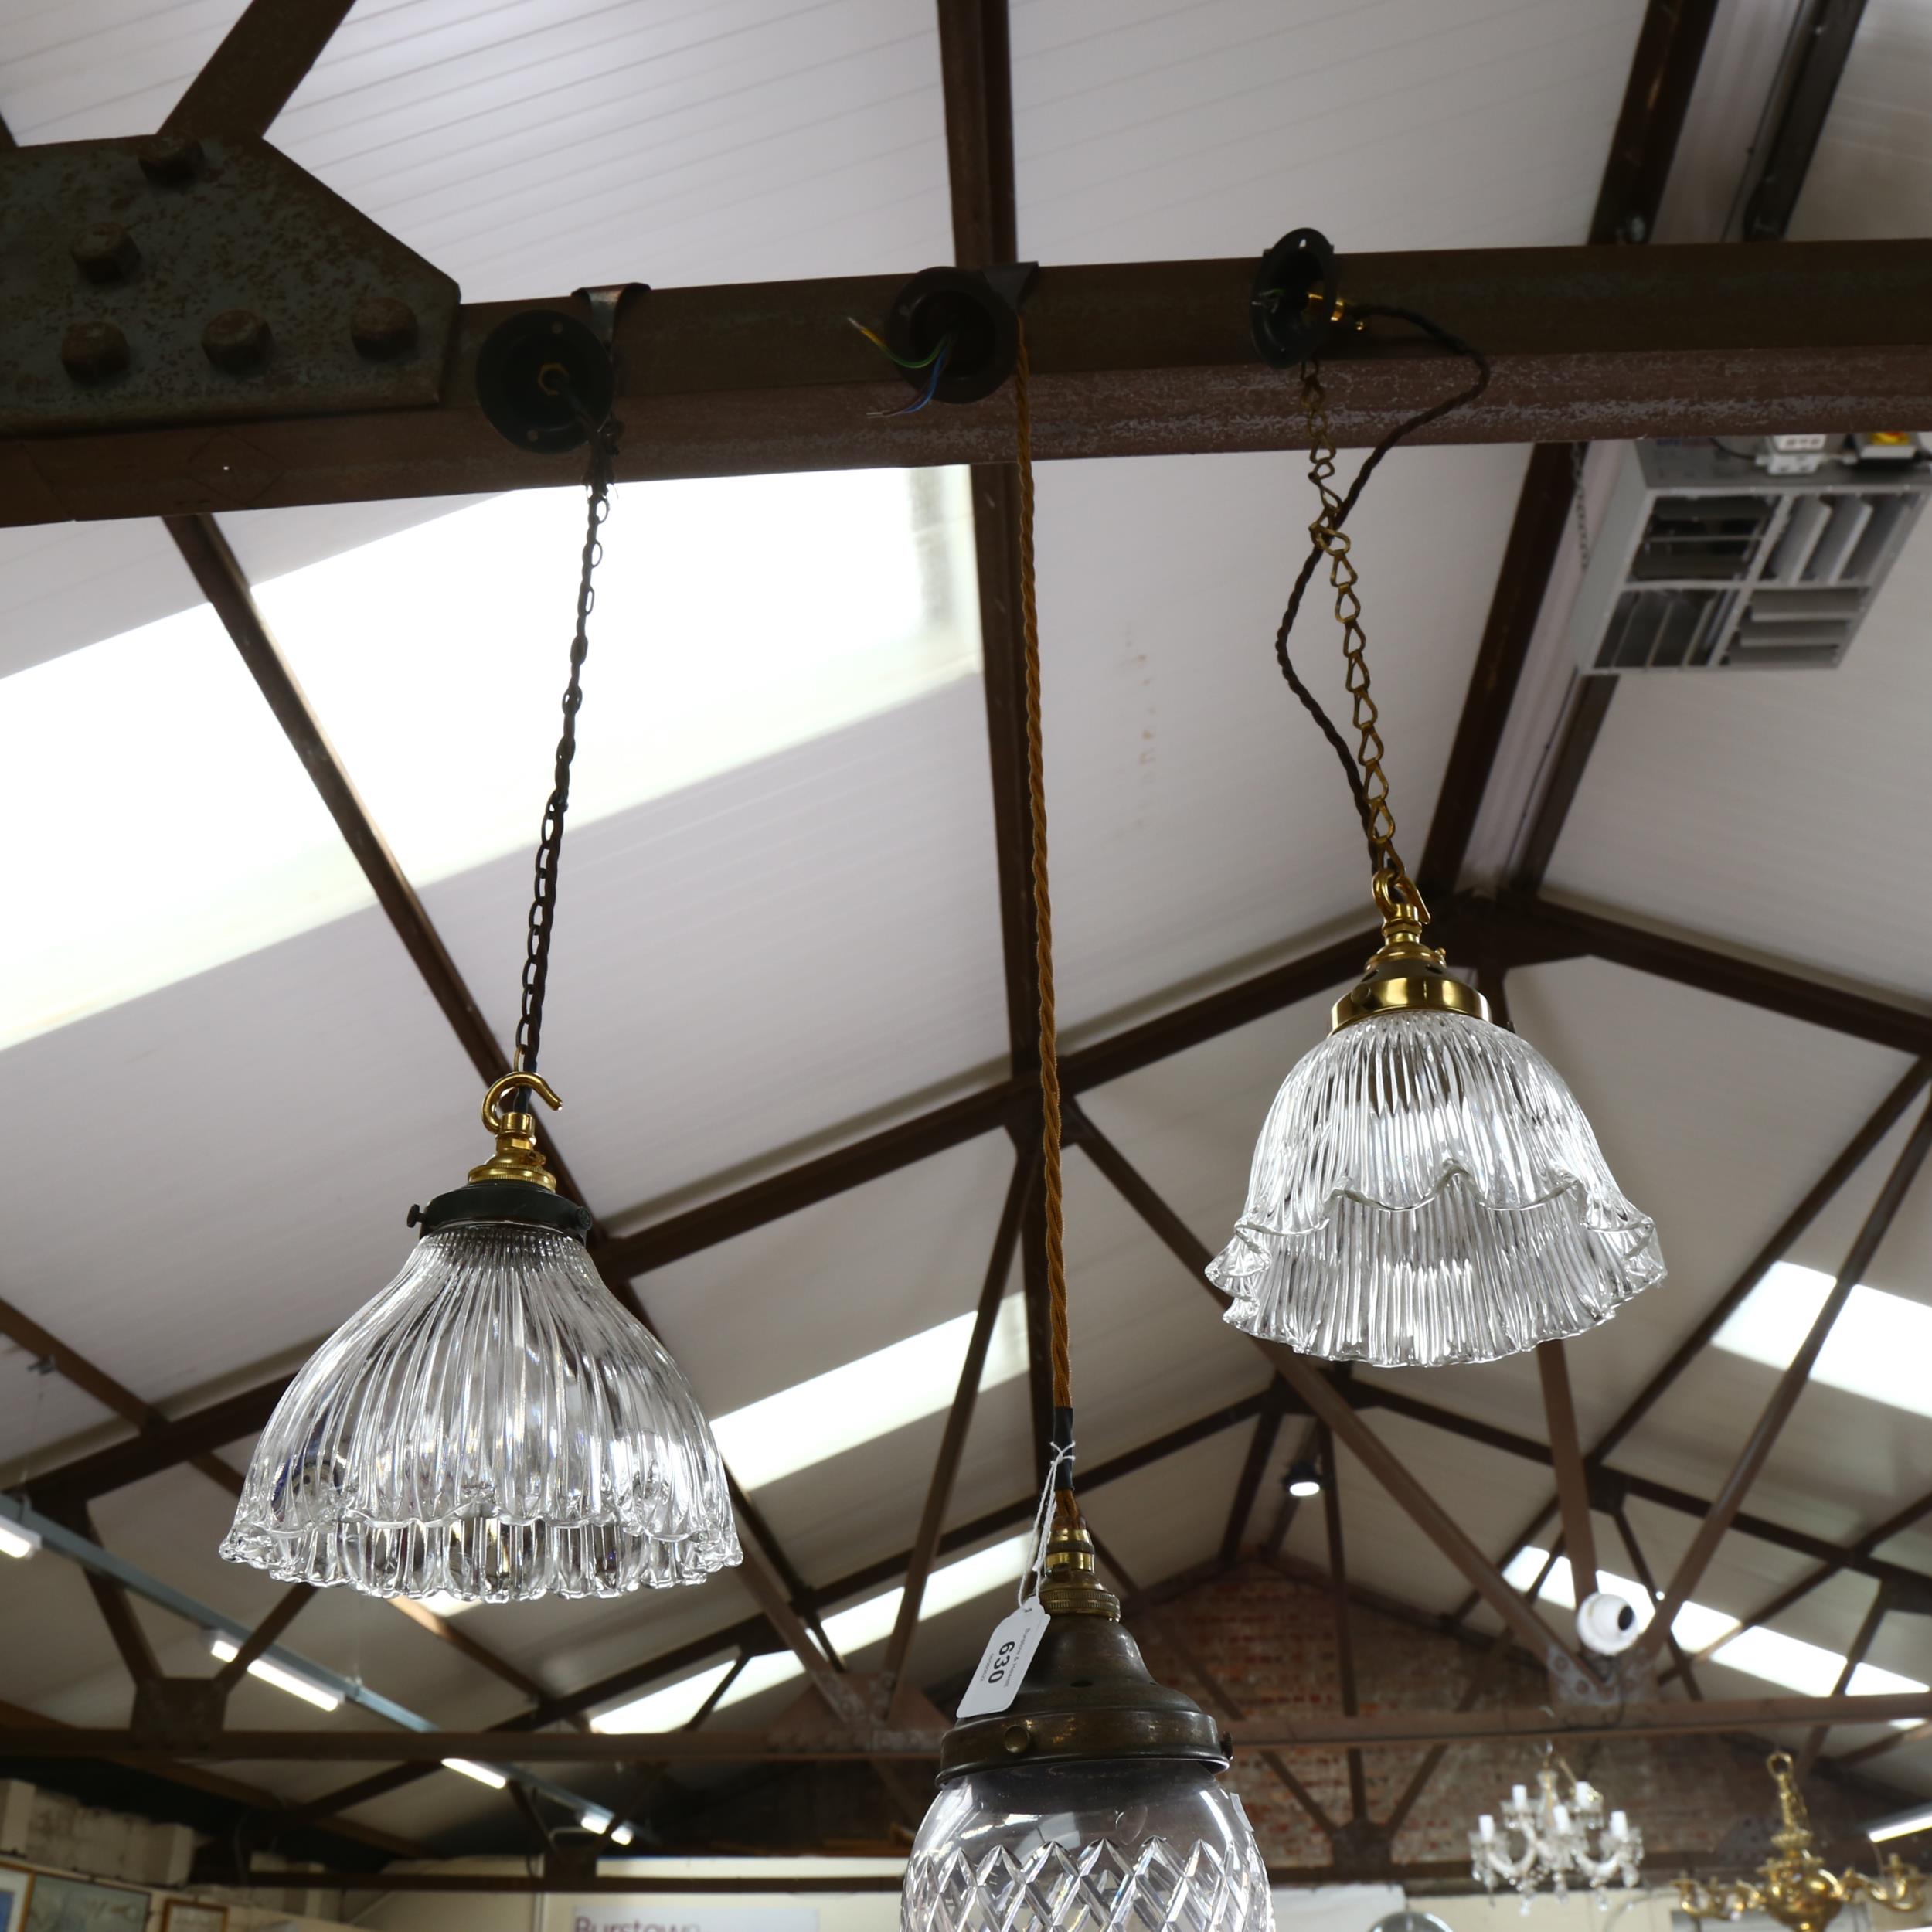 Vintage cut-glass and brass pendant light fitting, 2 hanging moulded glass light shades with - Image 2 of 2